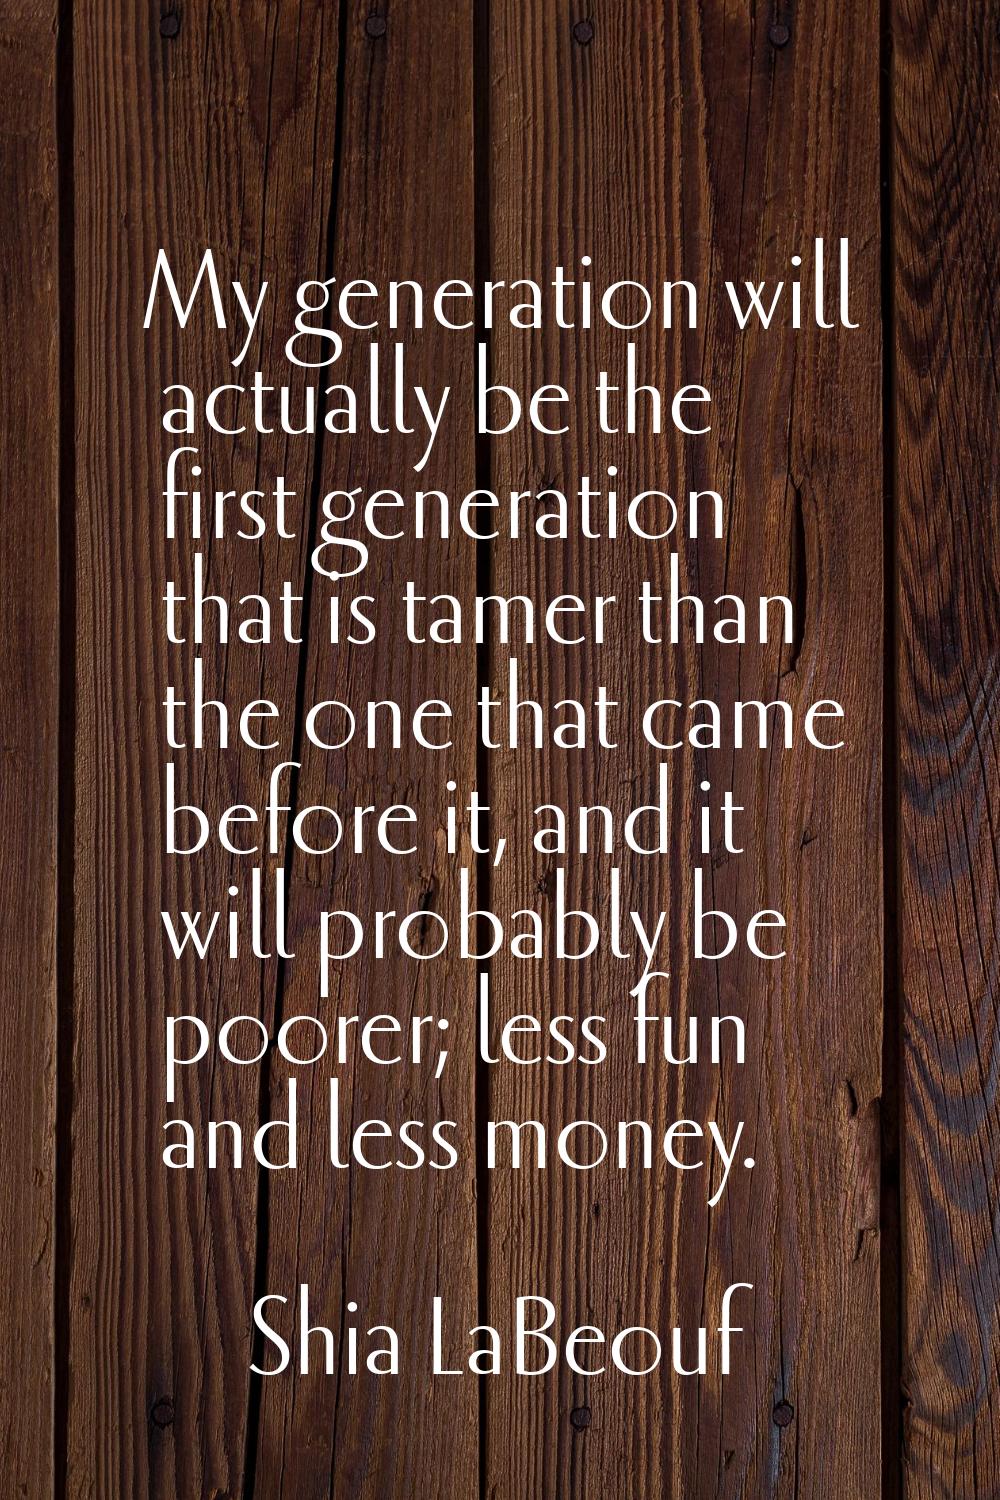 My generation will actually be the first generation that is tamer than the one that came before it,